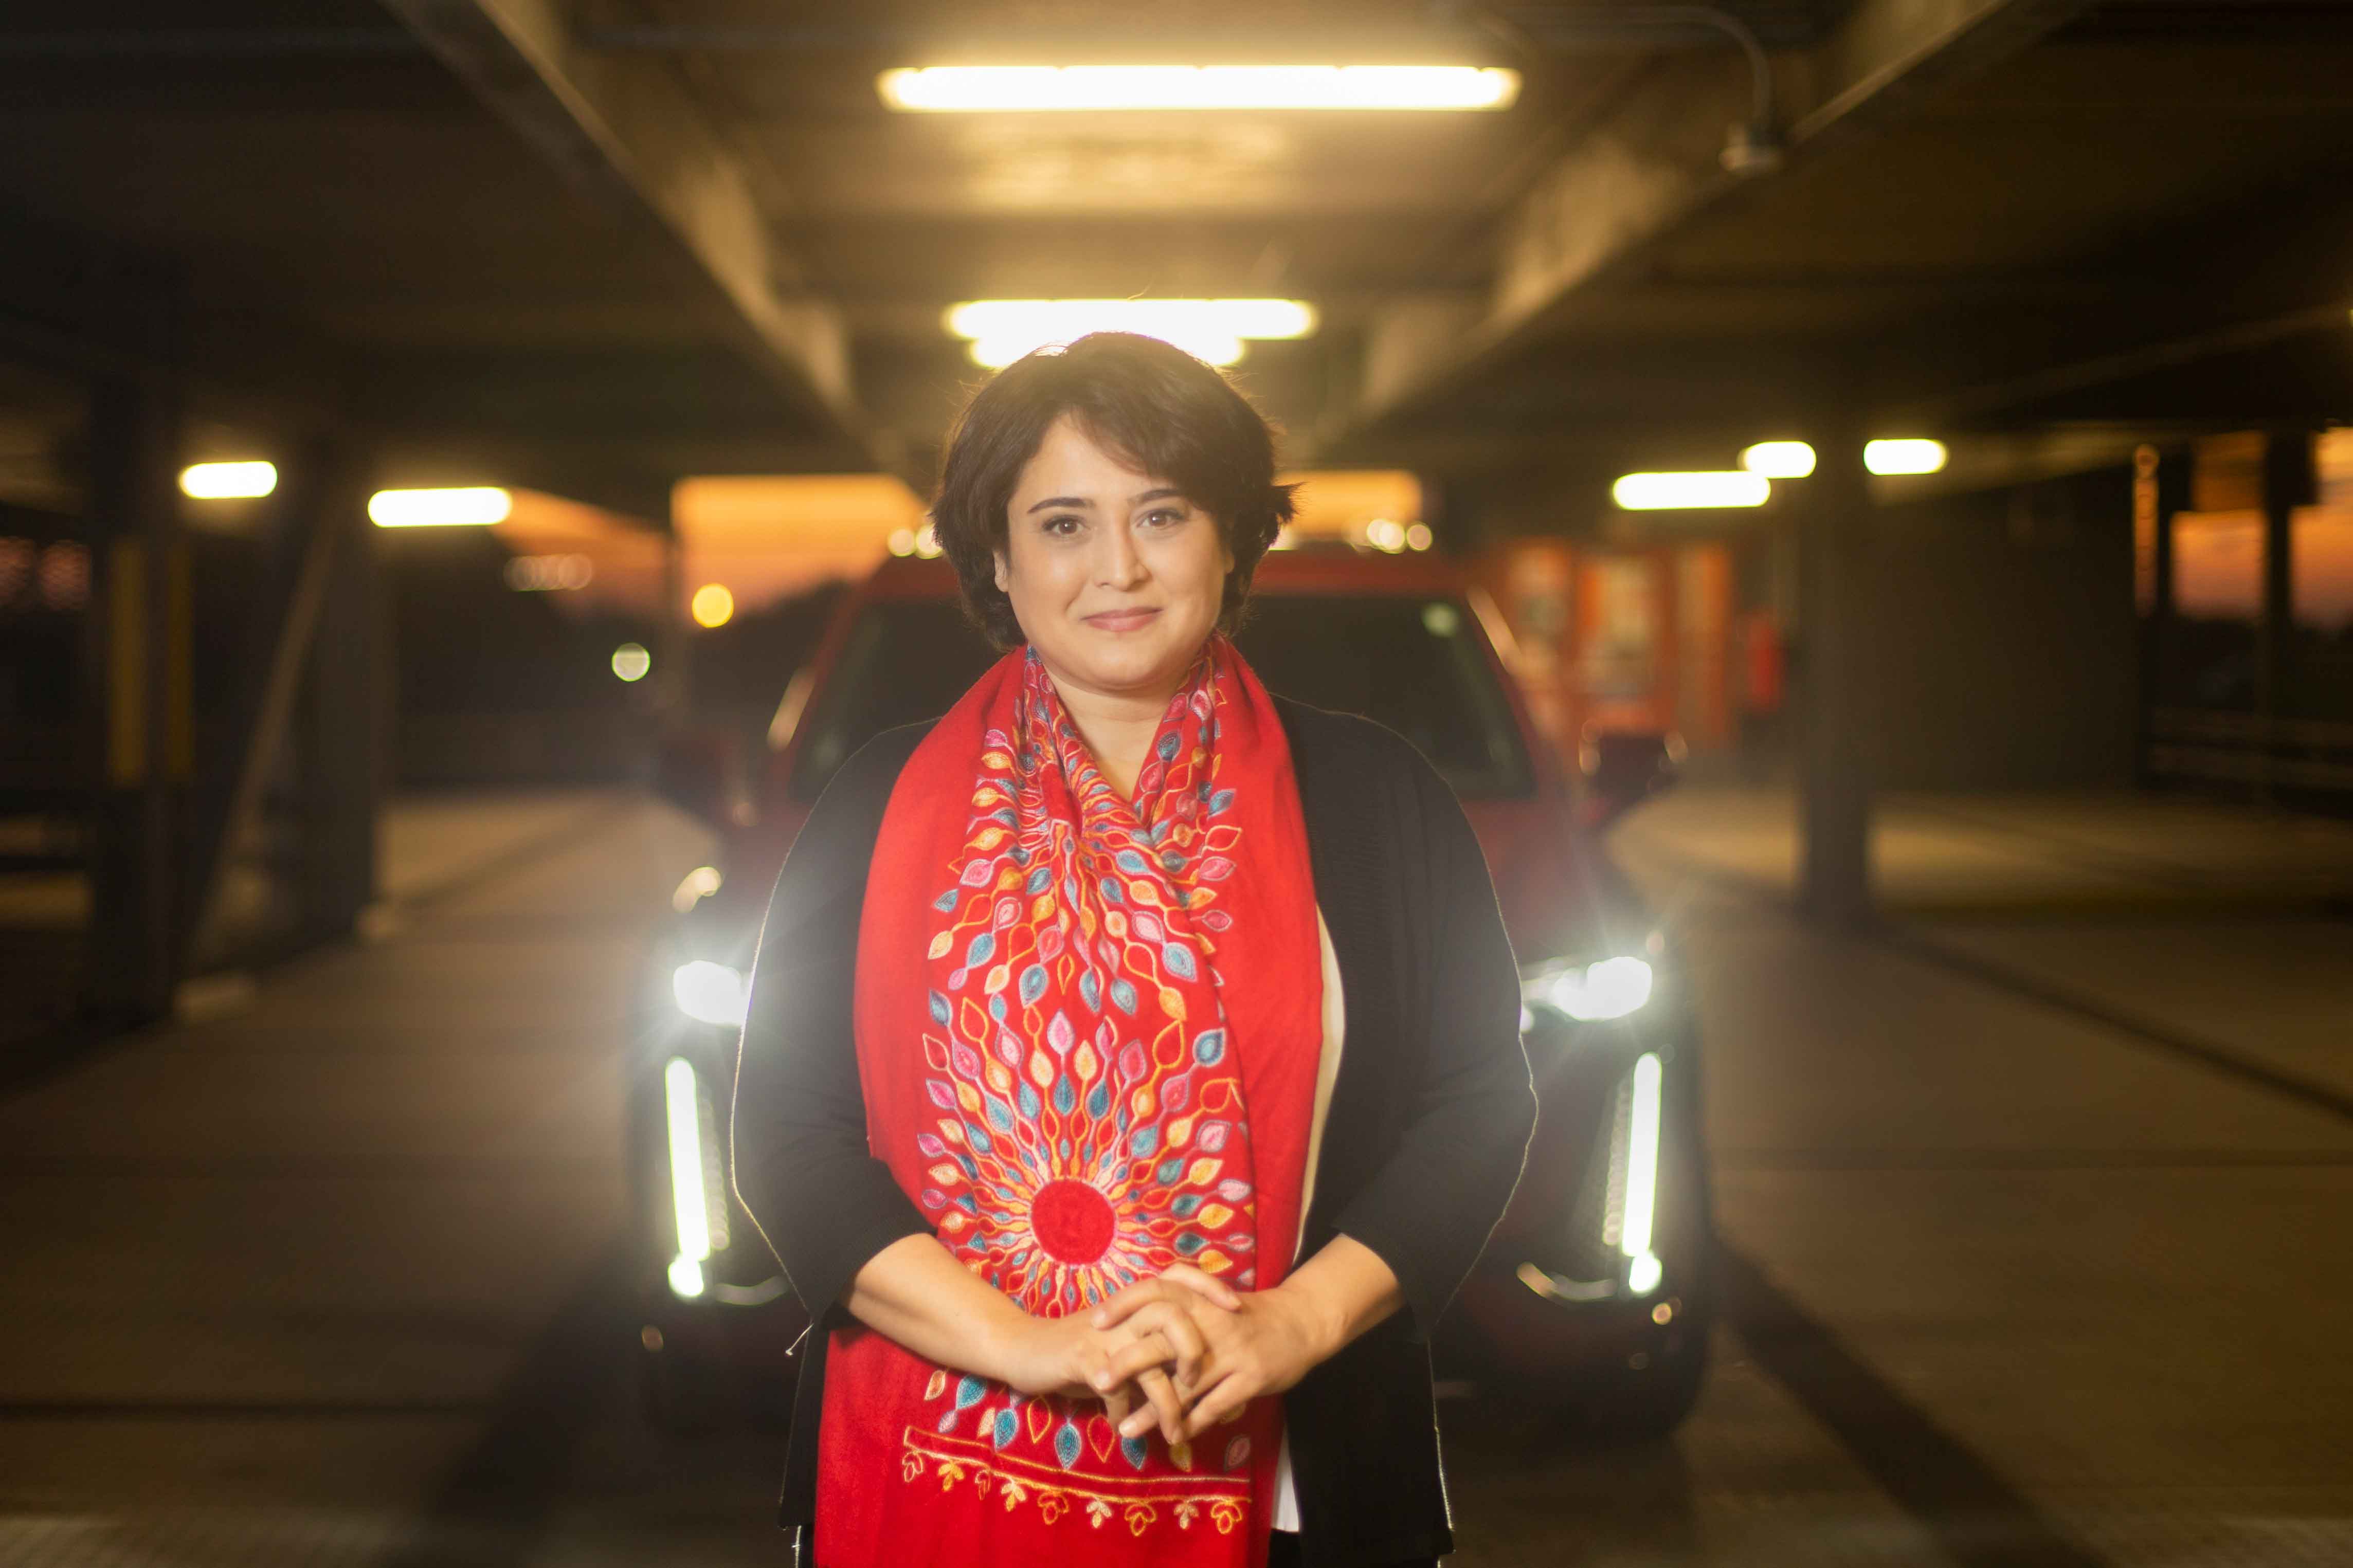 Dr. Mitra Mirhassani poses in front of a vehicle